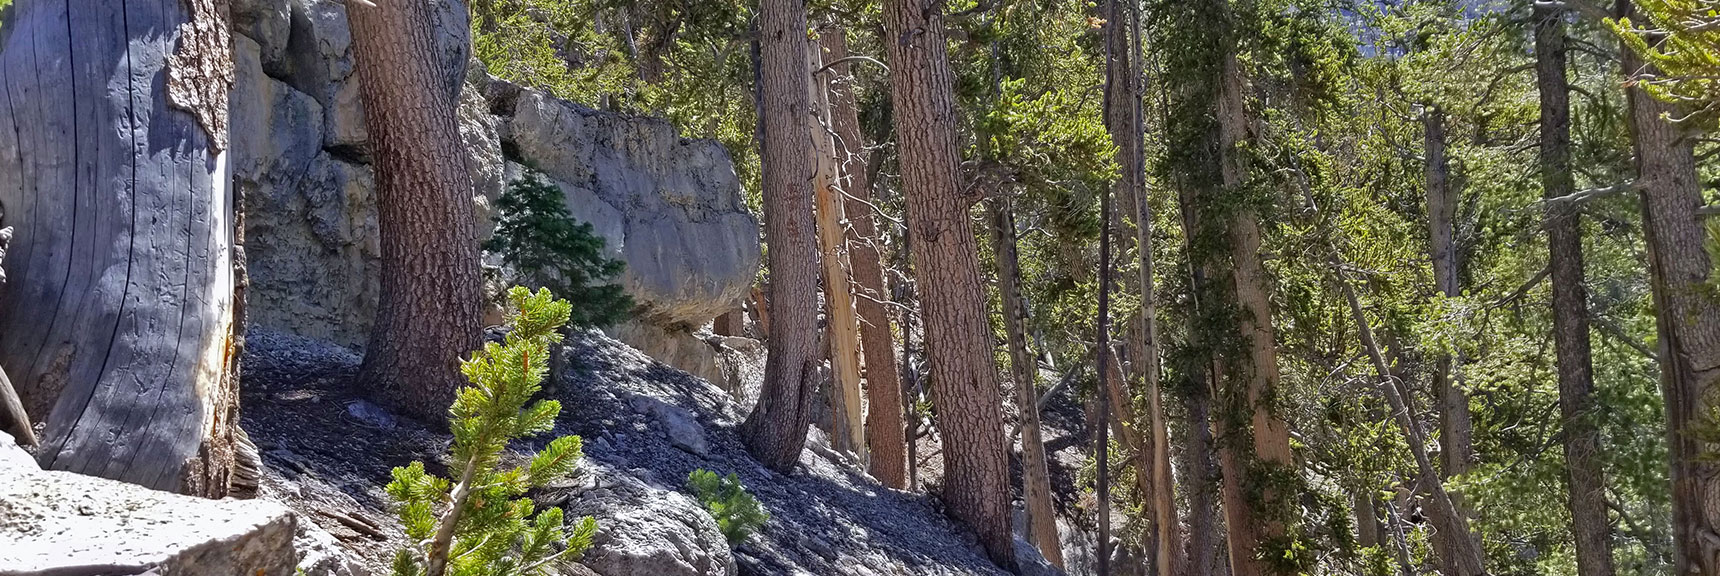 Hug the Base of the Cliff on This Narrow Passageway | Lee to Kyle Canyon | Foxtail Approach | Mt Charleston Wilderness | Spring Mountains, Nevada